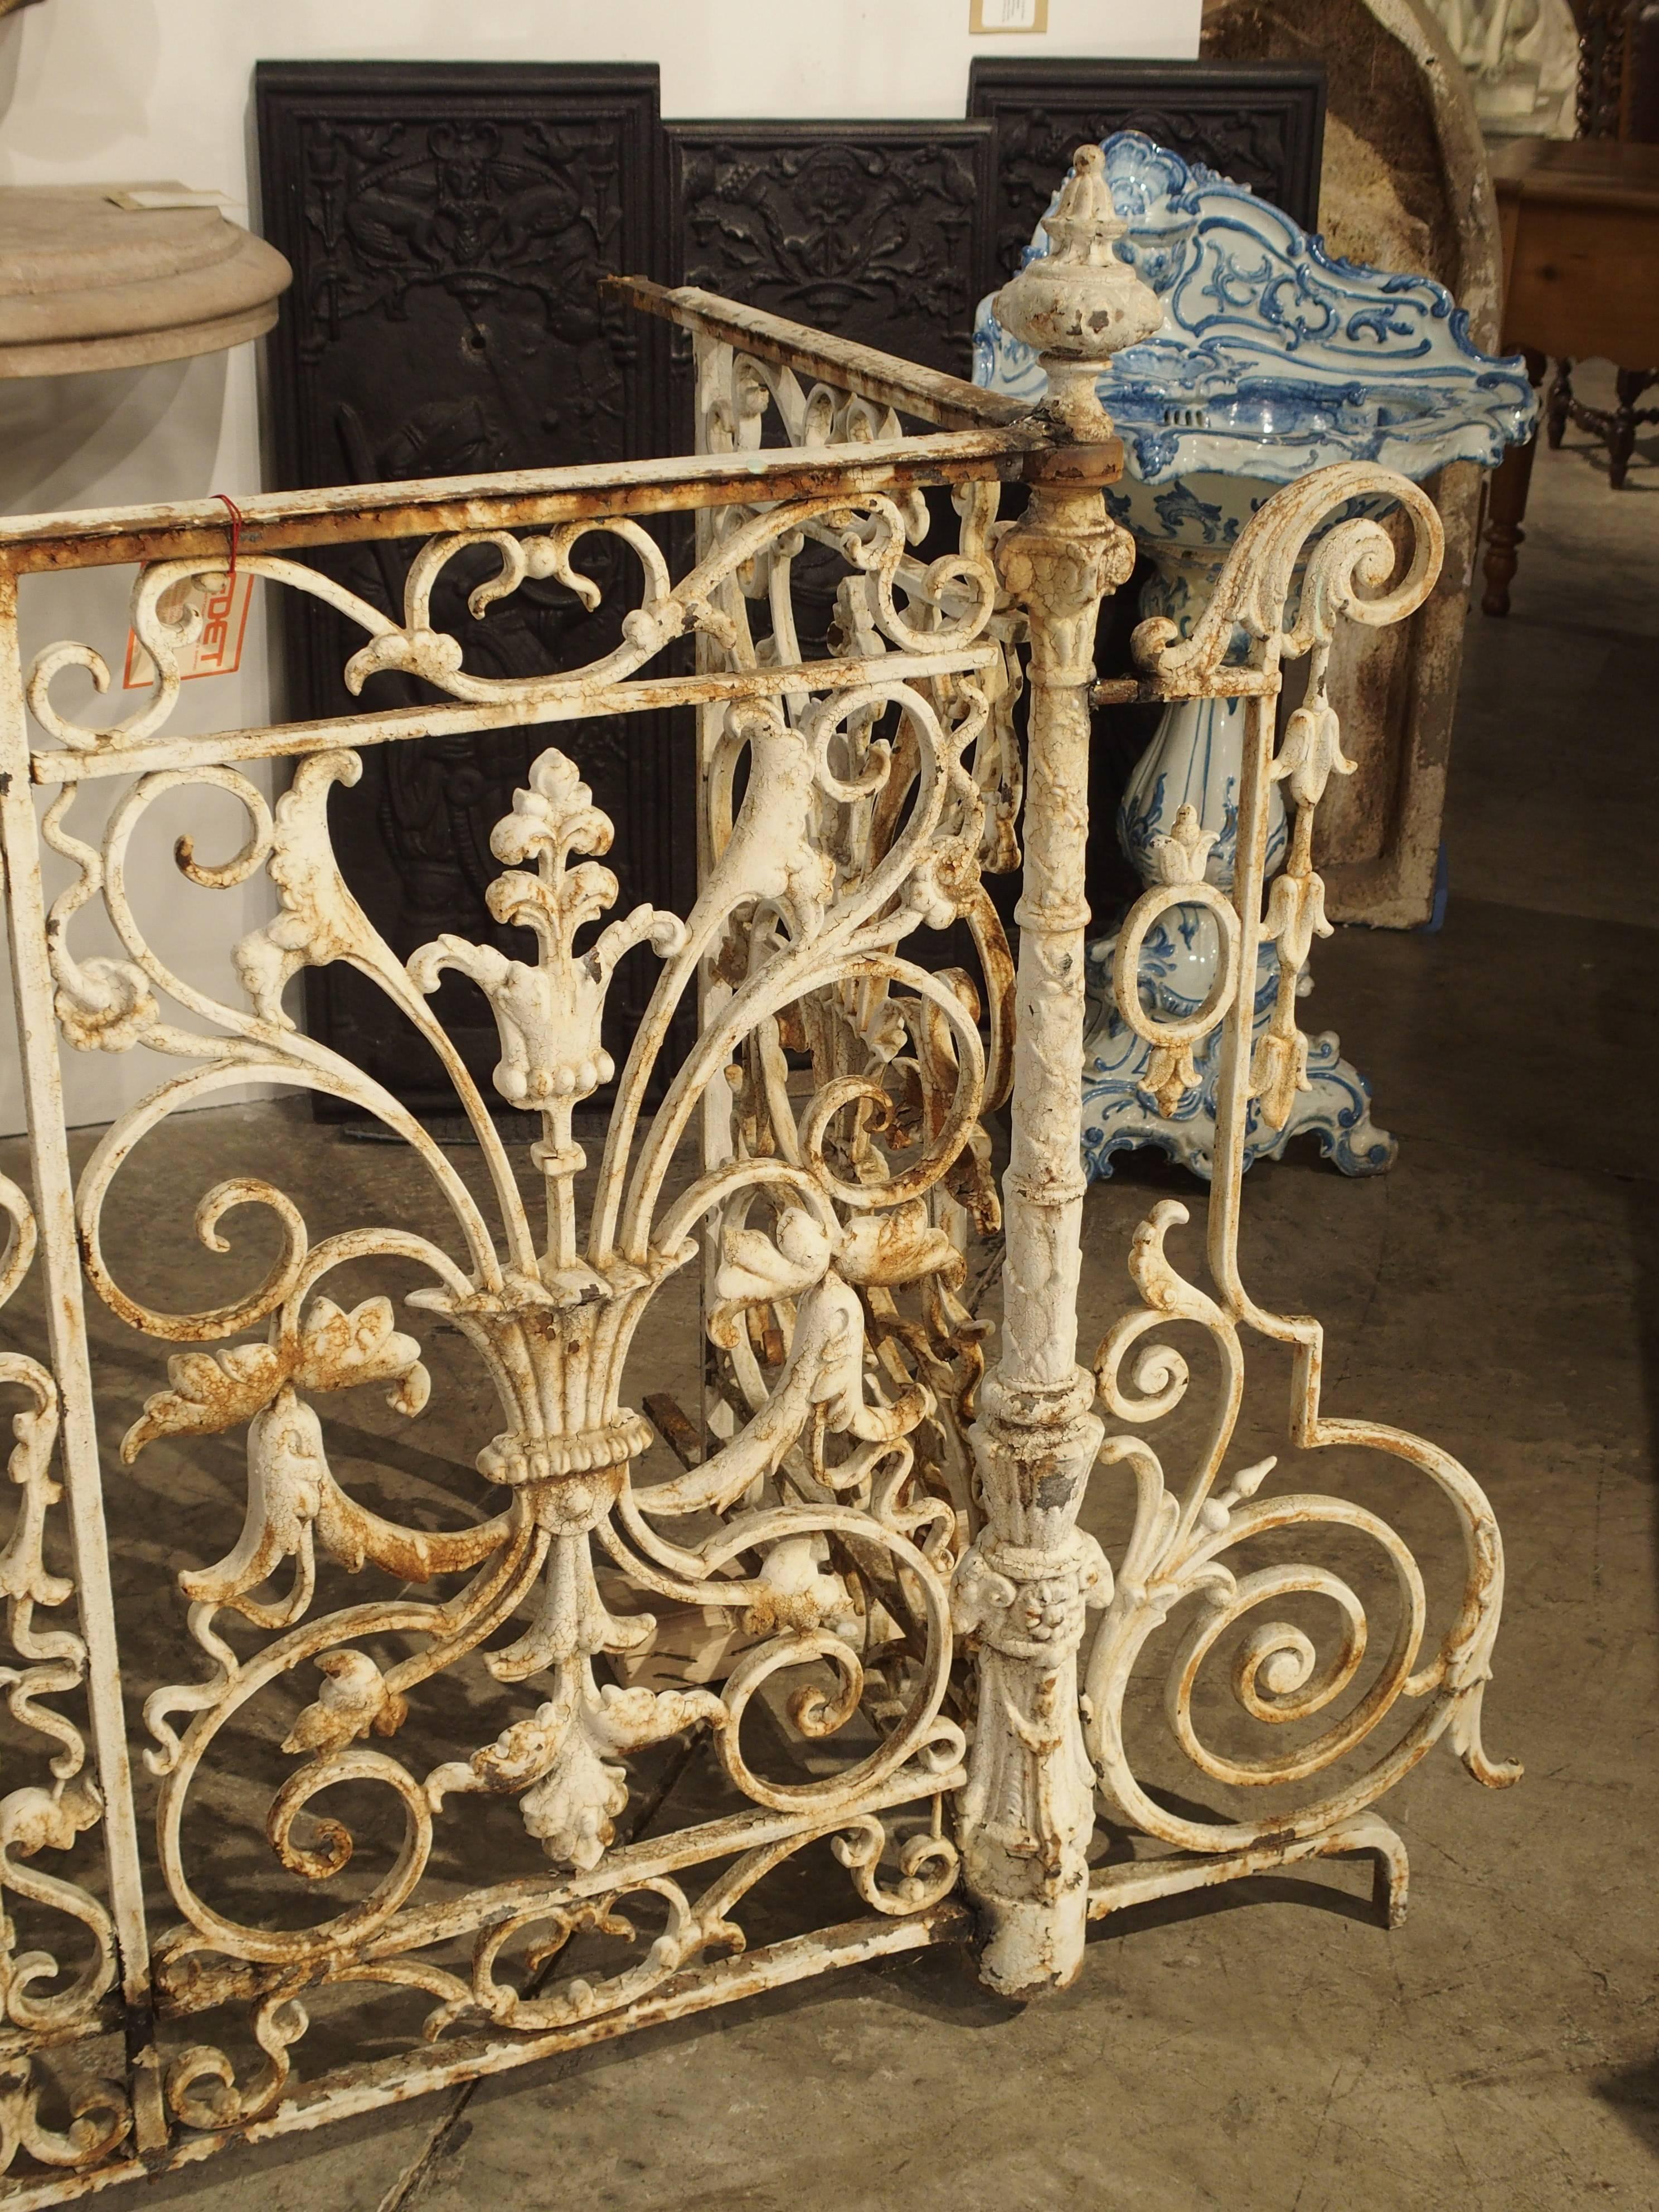 Hand-Painted Circa 1860 Painted Cast Iron Balcony Railing from Montpellier, France